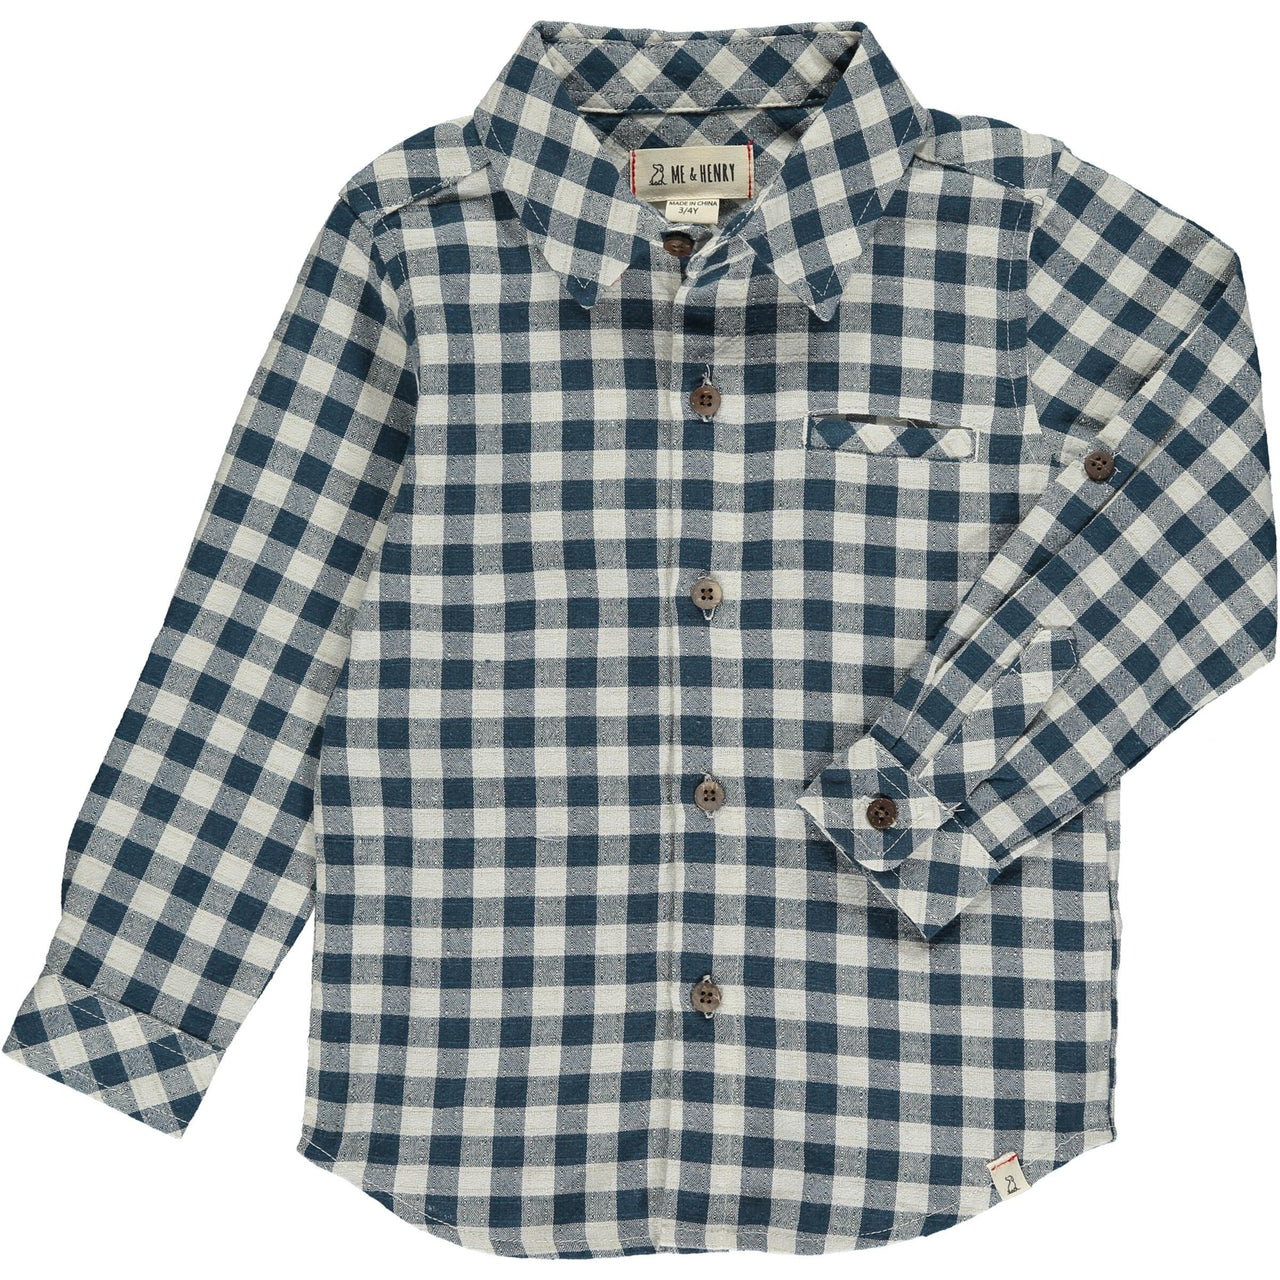 Atwood Woven Shirt | Teal Plaid